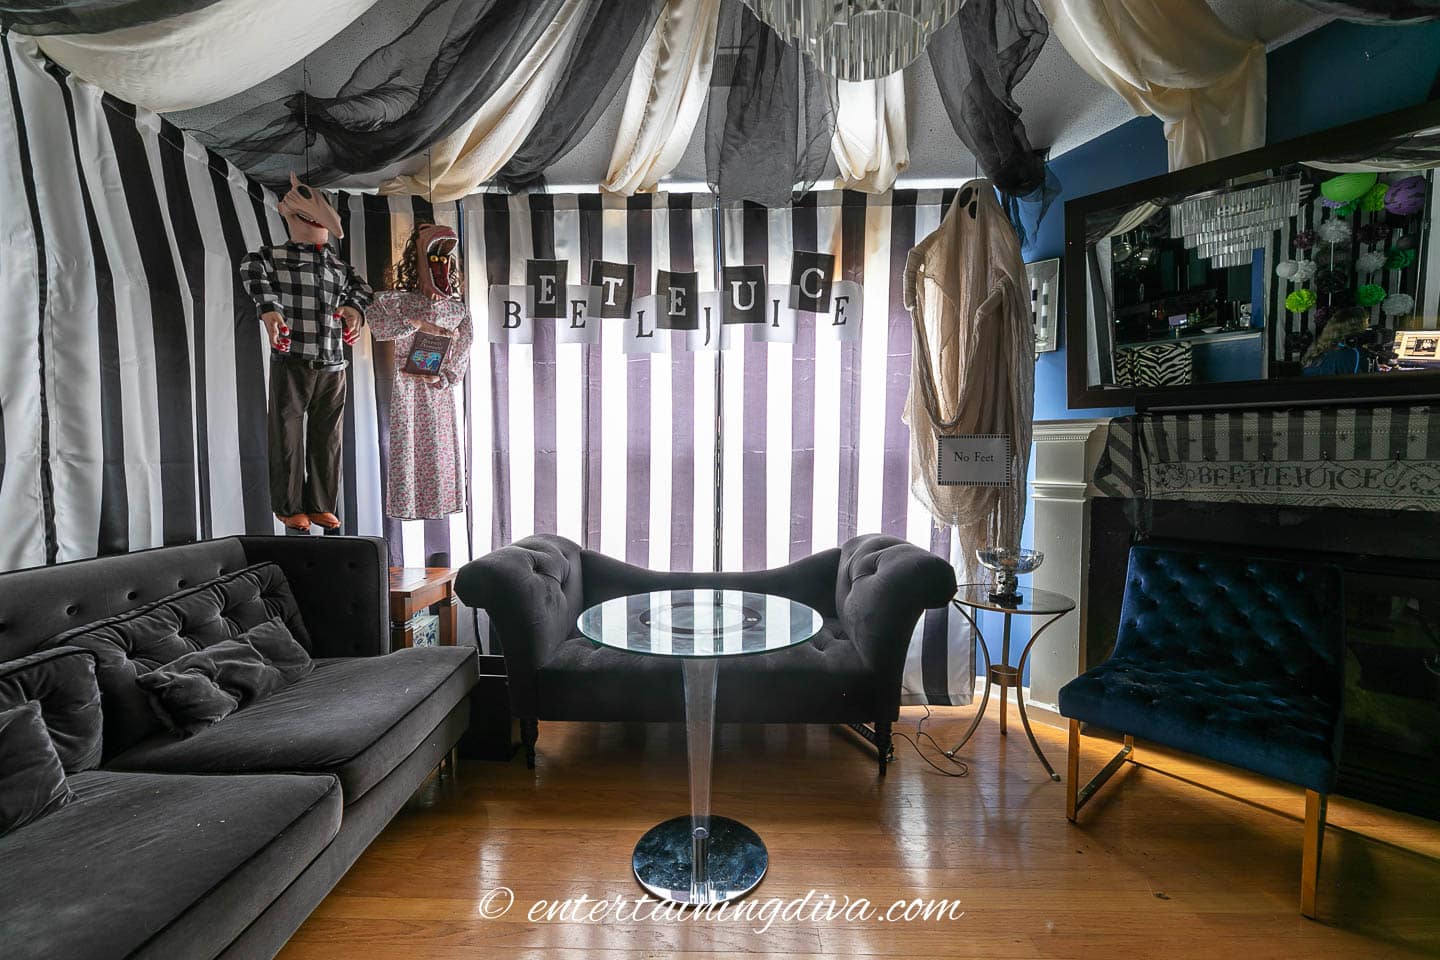 A living room at a Beetlejuice party decorated with black and white striped curtains.